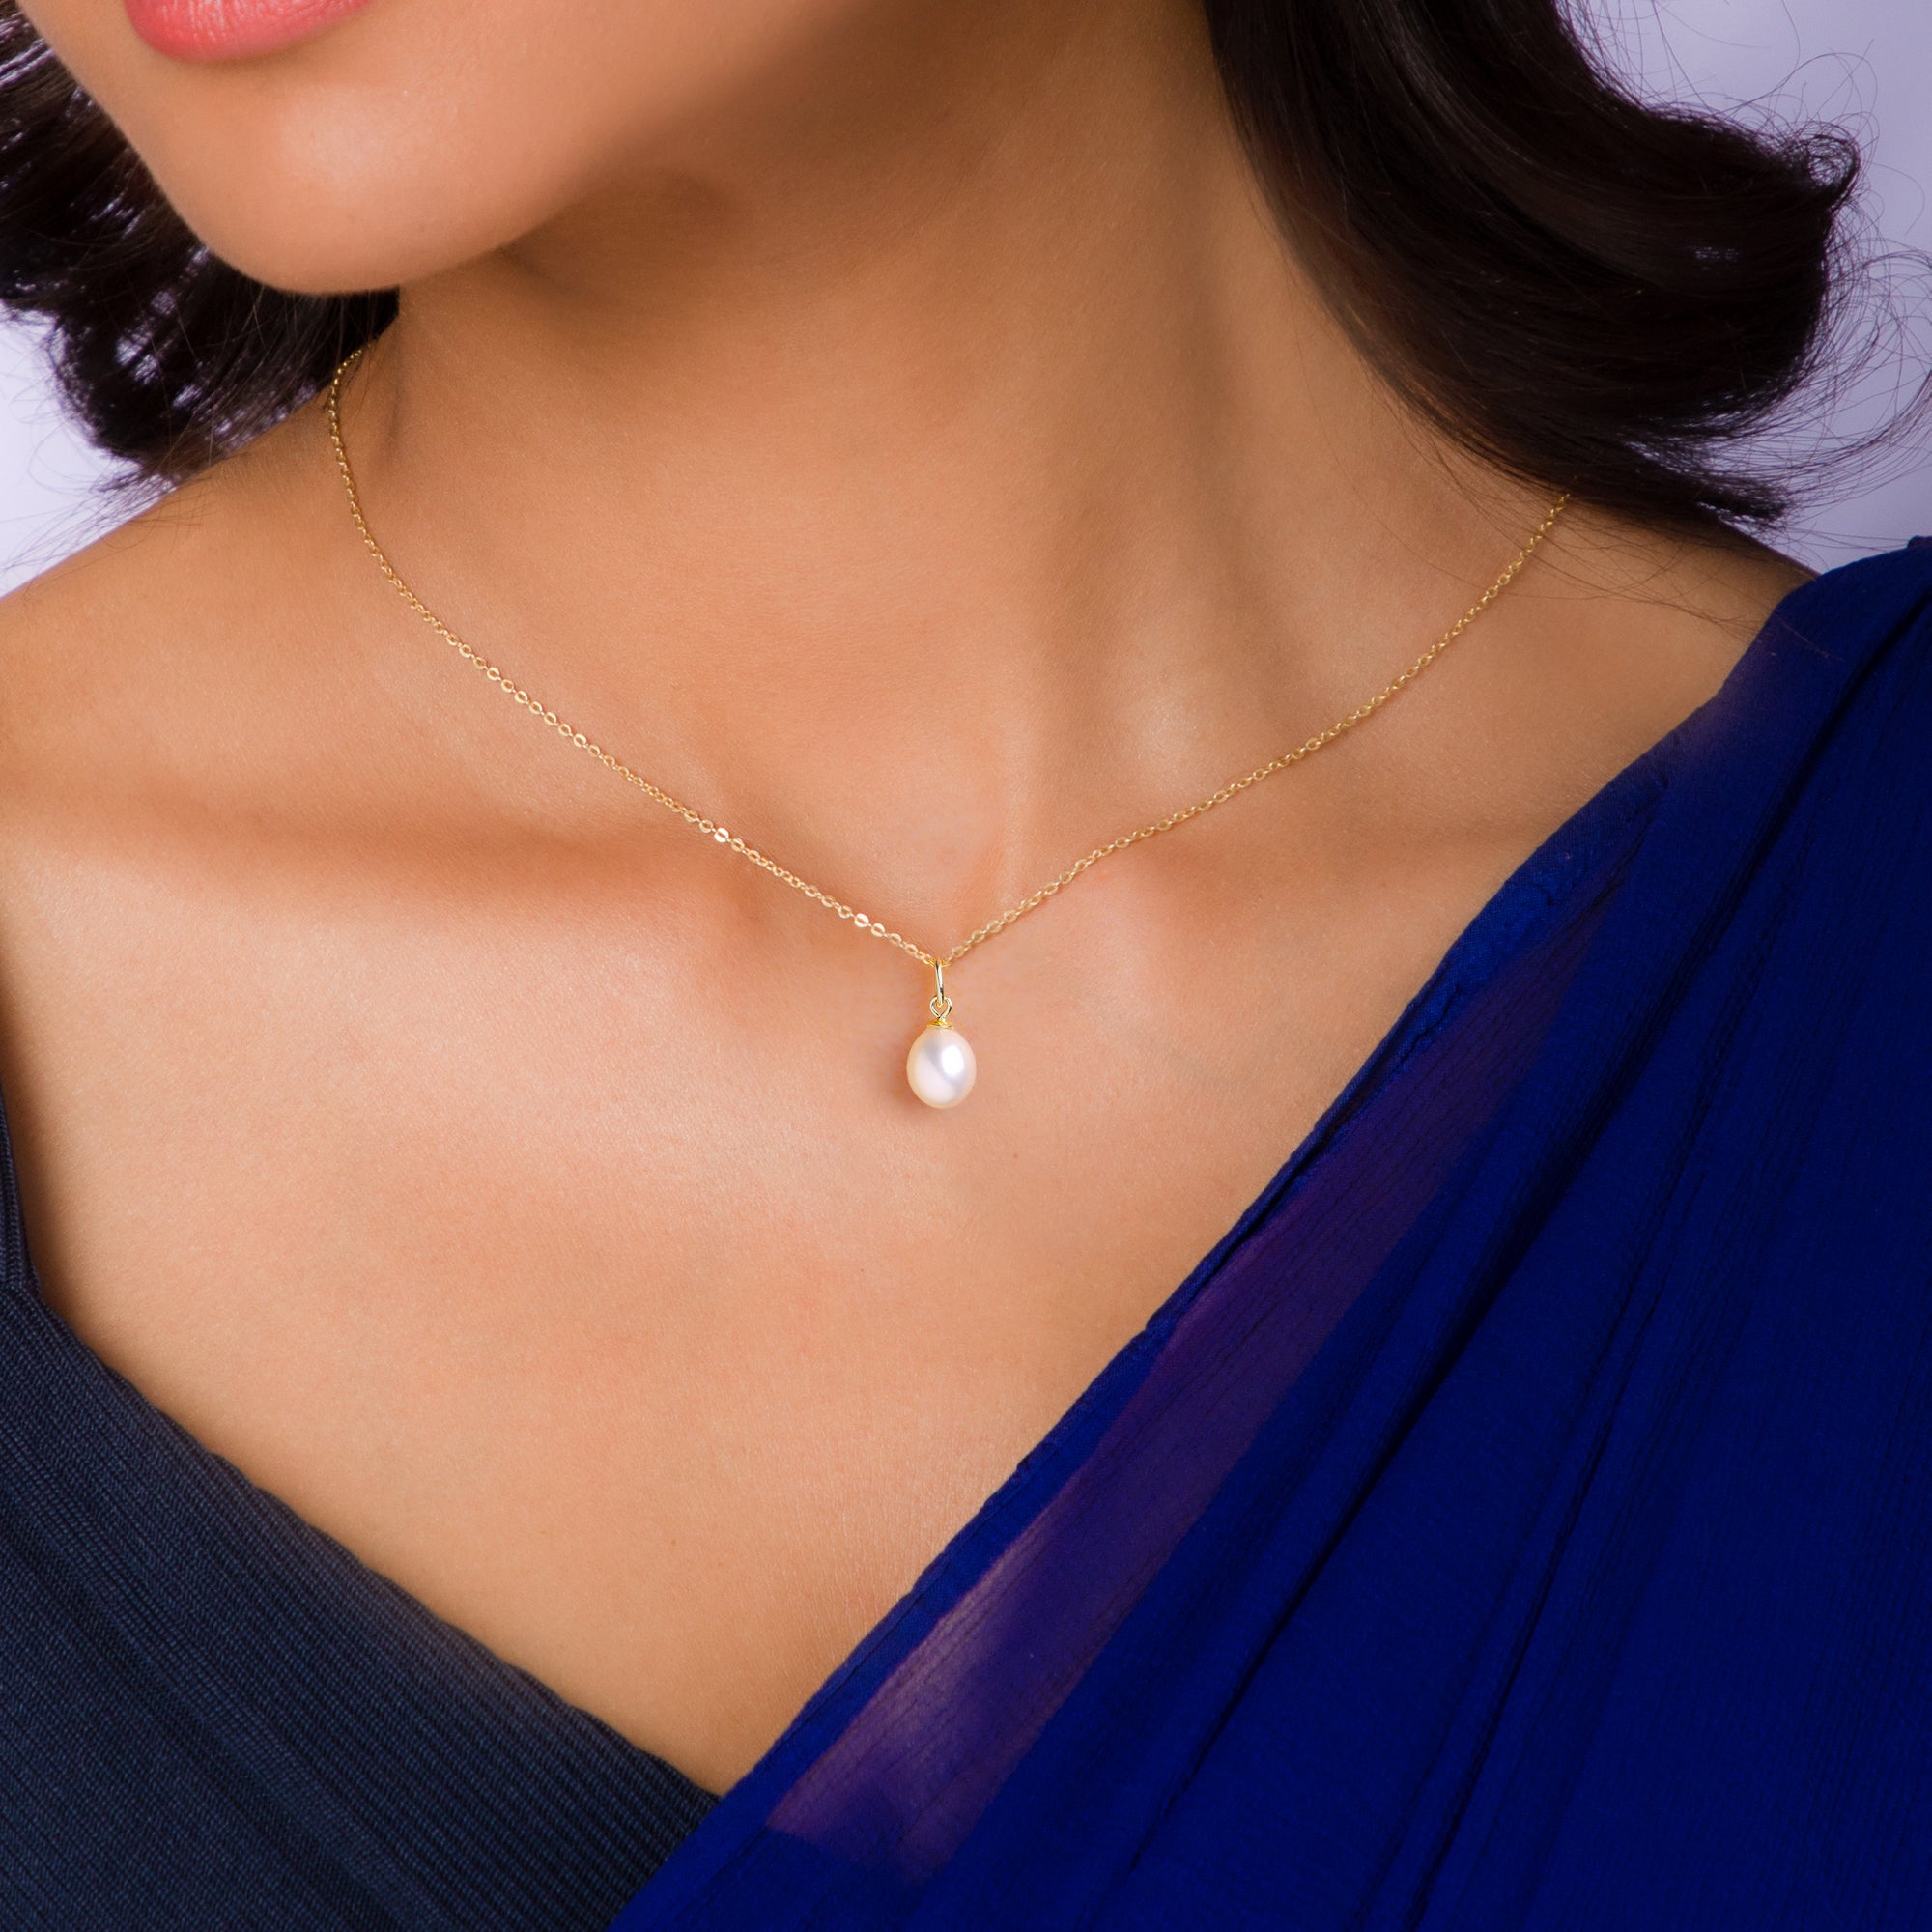 Women's Pearl Necklaces